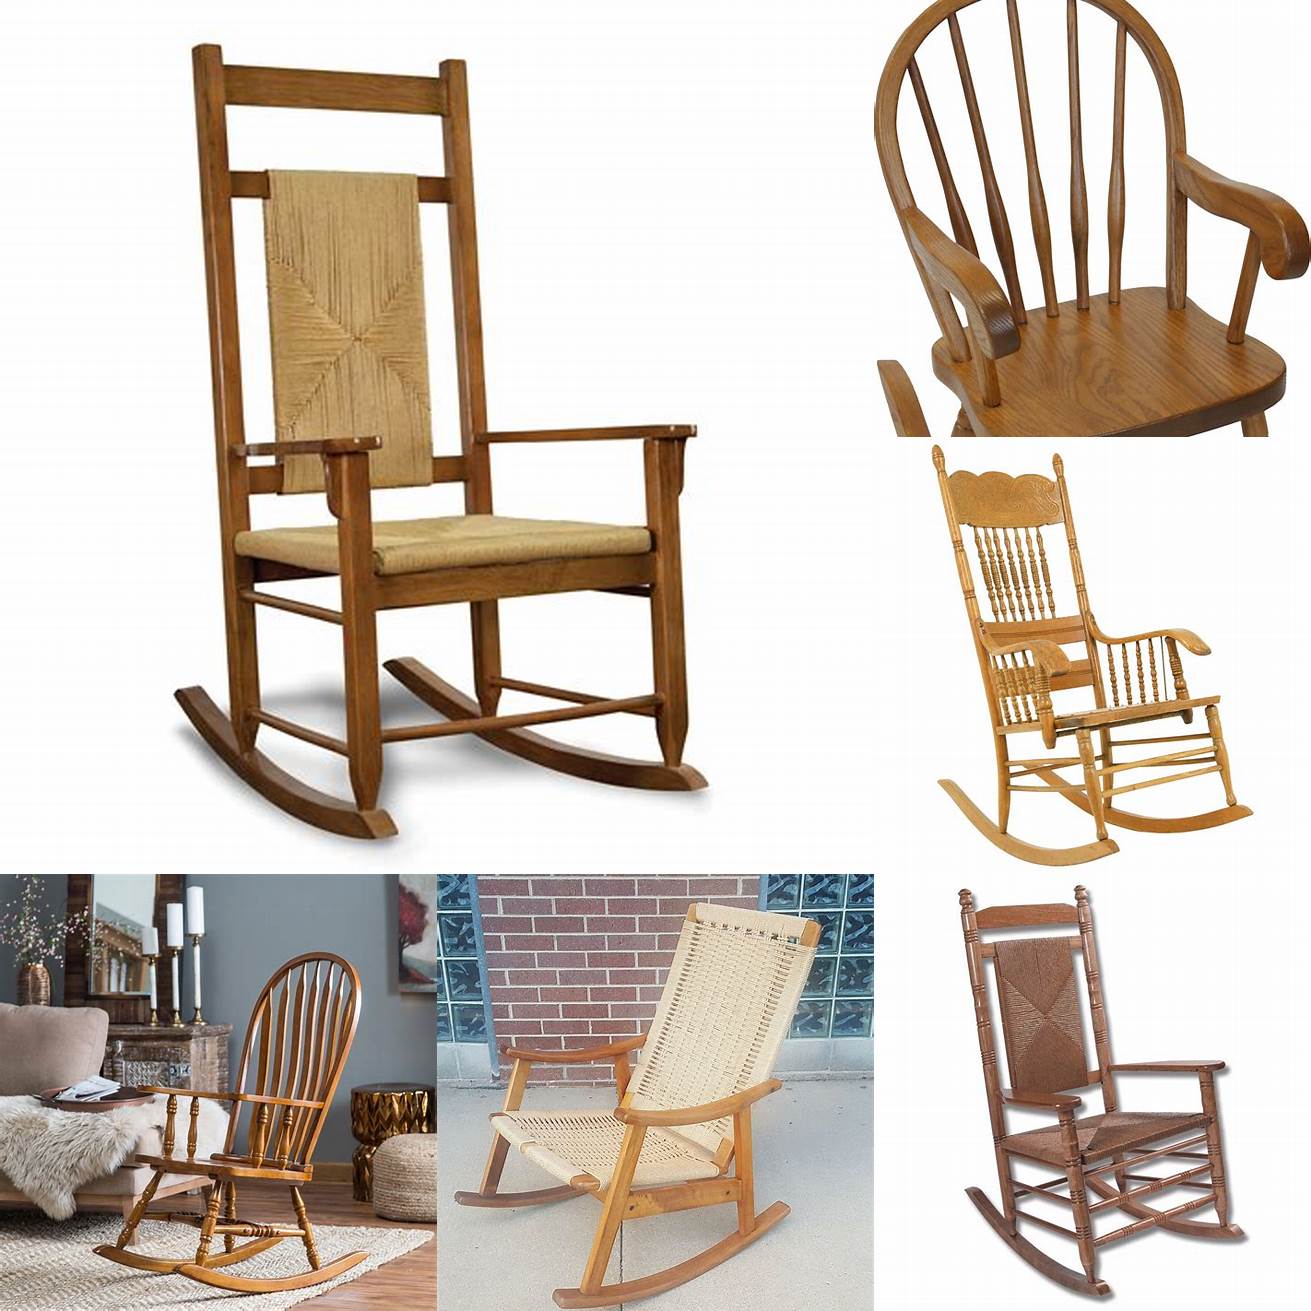 Oak rocking chair with woven seat